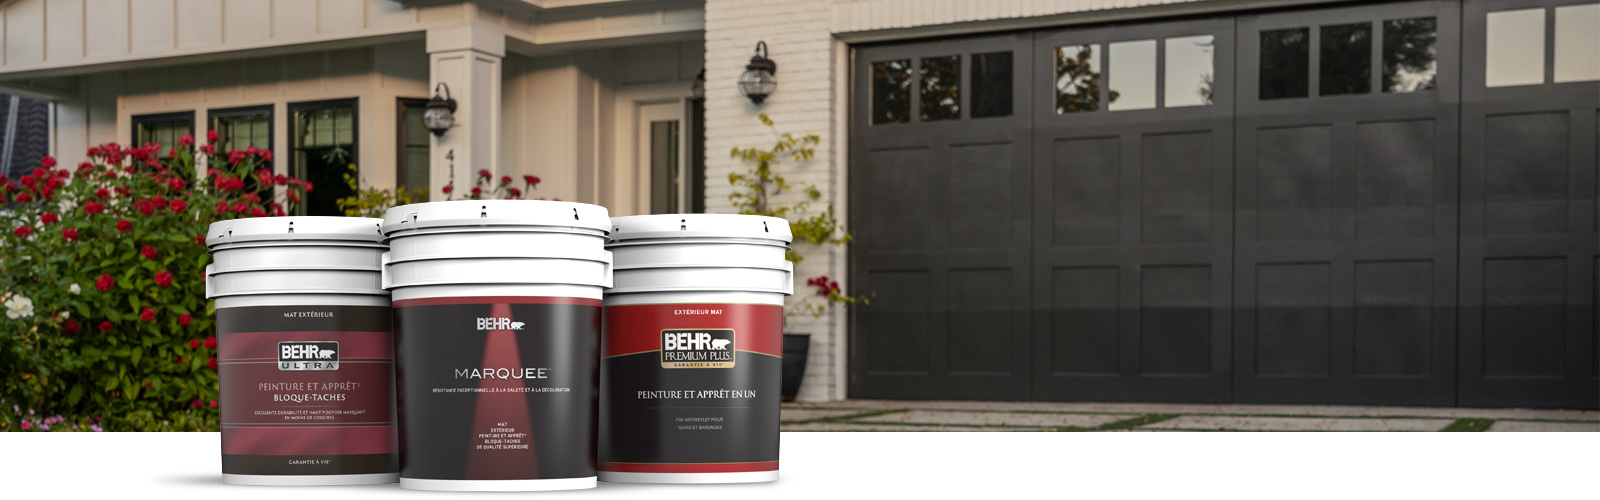 Behr Pro exterior products landing page desktop image with 5 gallon cans.